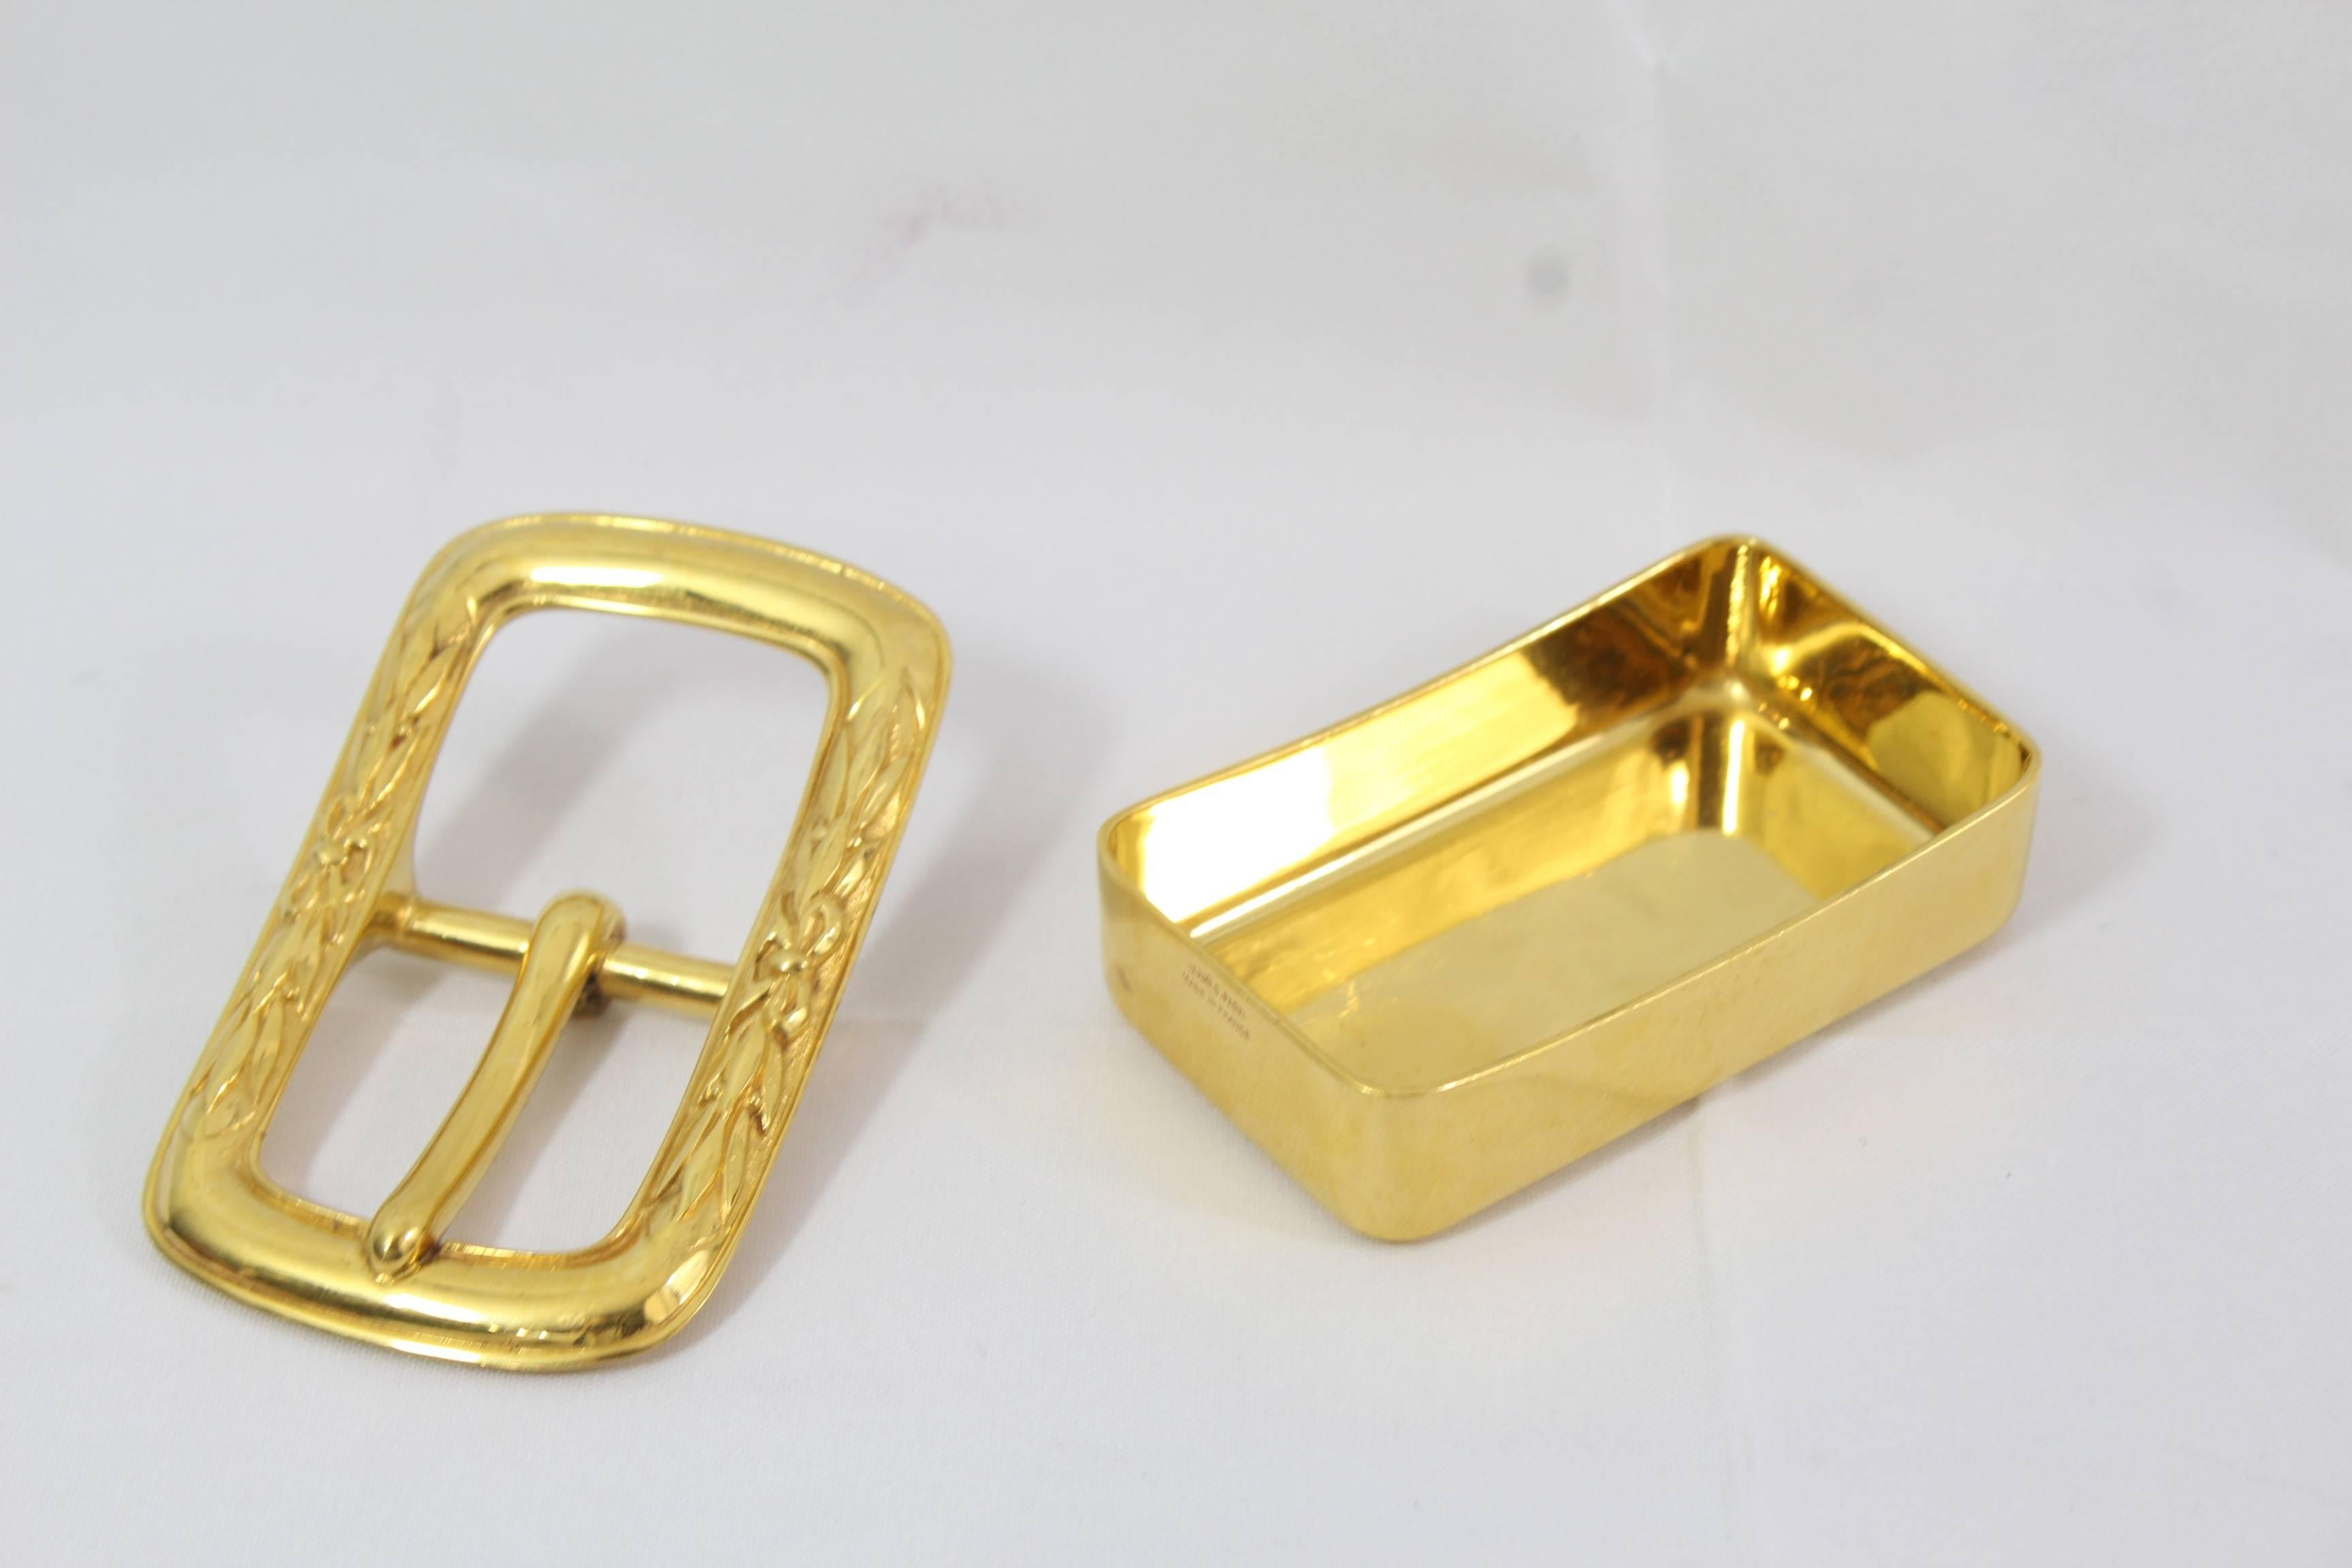 Vintage Hermes Ashtray in gold plated metal.

Really god vintage condition.

Size 8.5 centimeters